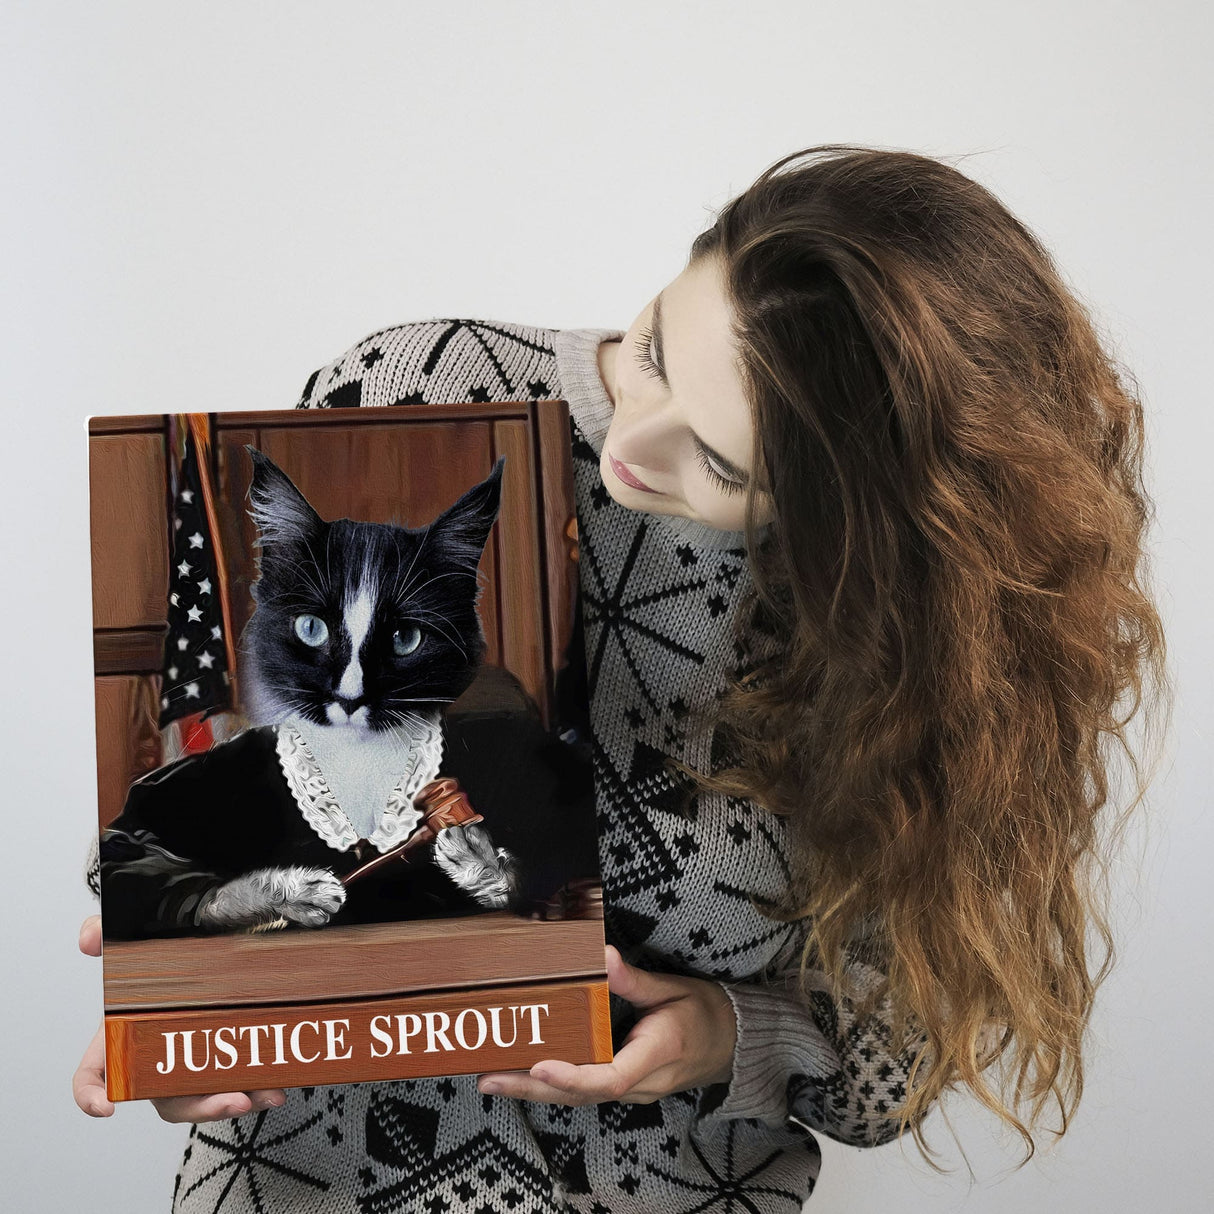 Posters, Prints, & Visual Artwork Cat Lovers - Justice - Personalized Pet Poster Canvas Print